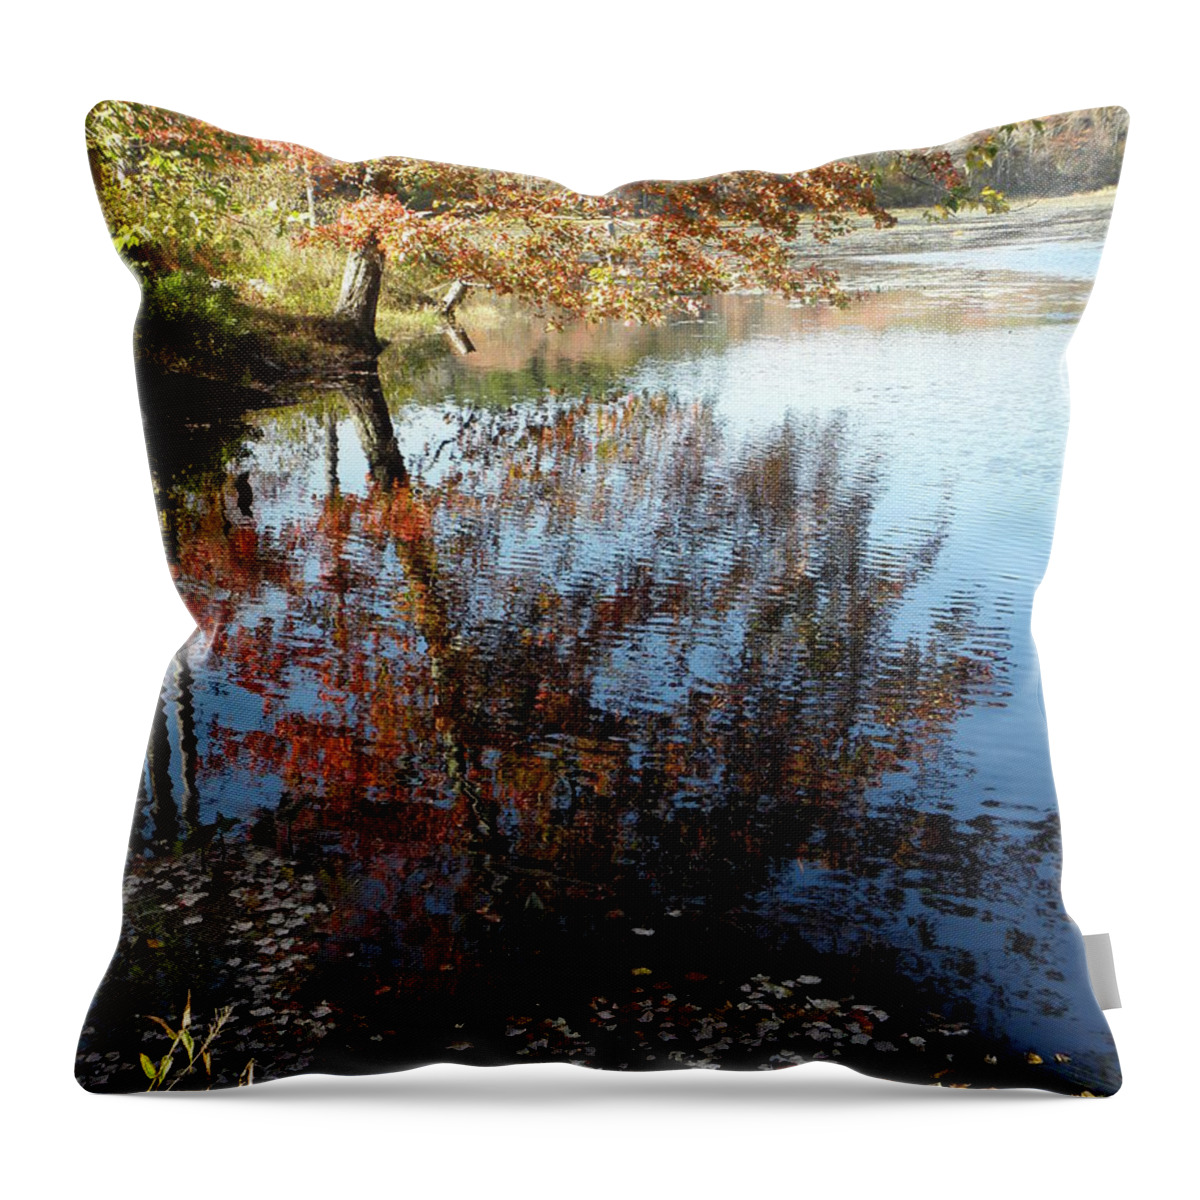 Leaves Throw Pillow featuring the photograph Leaves Of Reflections by Kim Galluzzo Wozniak